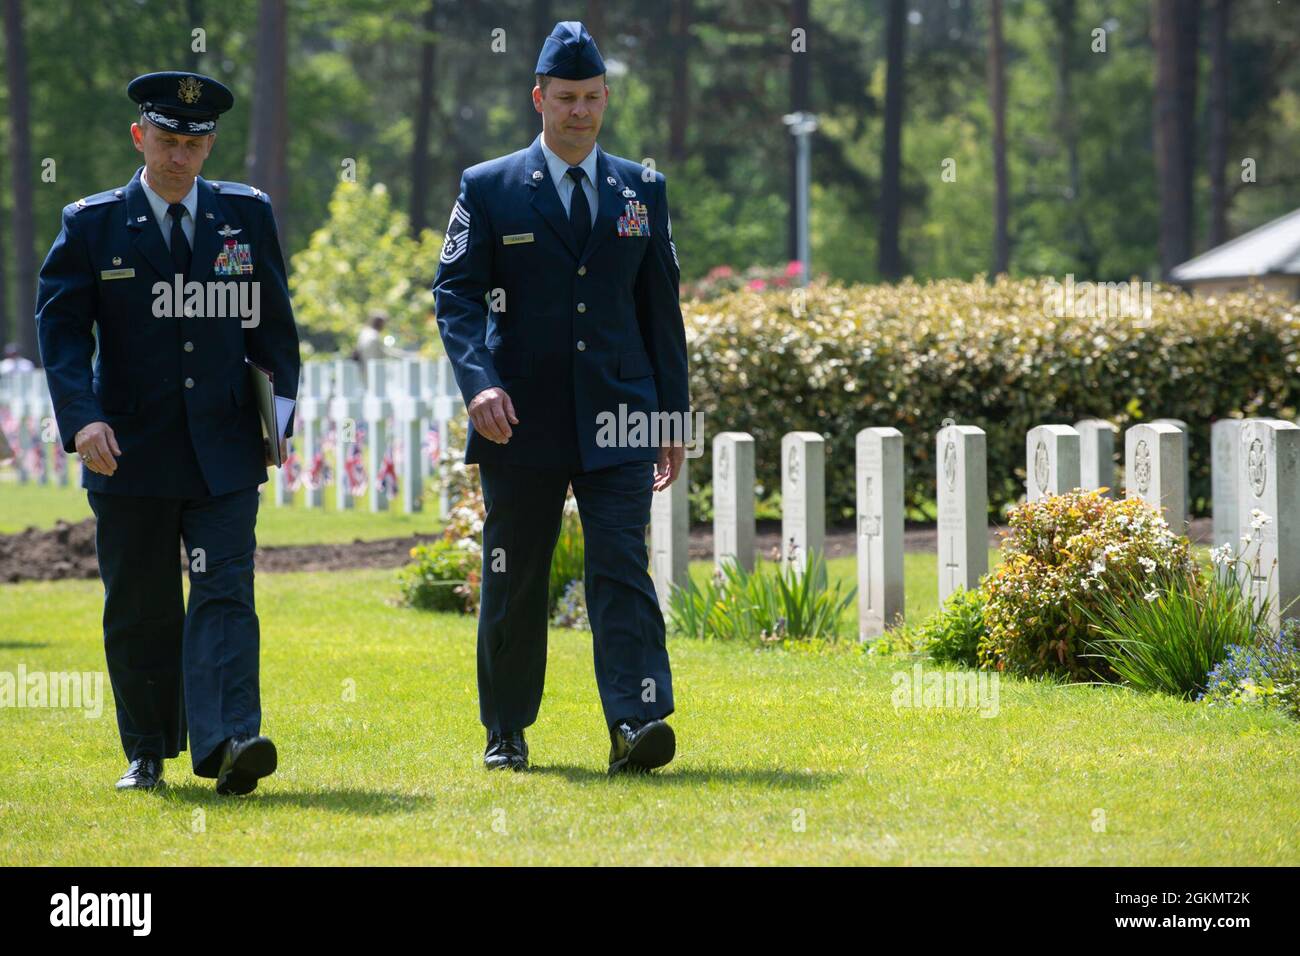 U.S. Air Force Col. Jon Hannah, left, 422nd Air Base Group commander, and Chief Master Sgt. Michael Venning, 422nd ABG superintendent, walk through the Brookwood American Military Cemetery, England, after a 2021 Memorial Day ceremony May 30, 2021. Memorial Day is one of our Nation's most solemn occasions. It serves as a chance to pause, reflect, and honor the women and men who gave the last full measure defending our Nation and our democratic ideals. Stock Photo